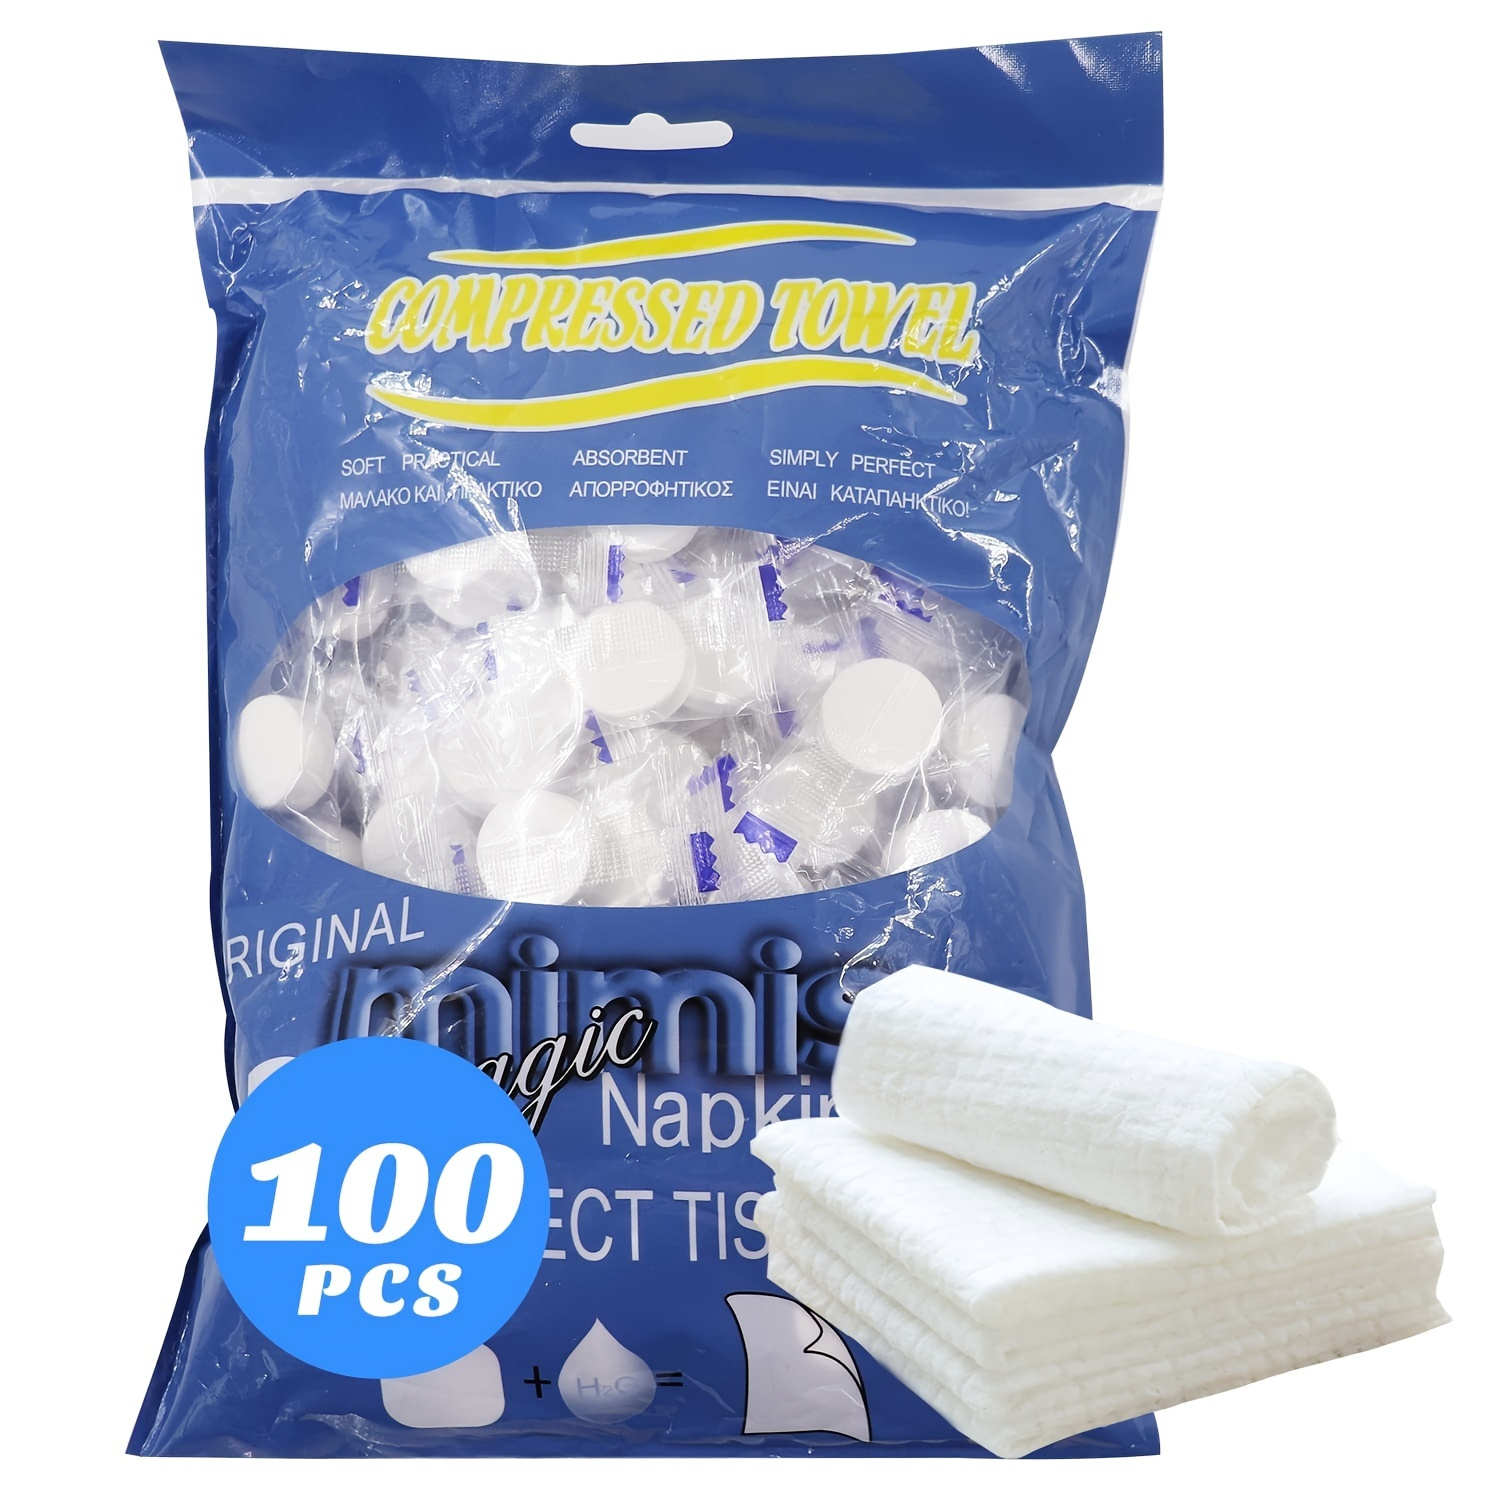 

Compressed Towels 100 Pcs Disposable Portable Face Towel Mini Tablets Cotton Coin Tissue For Travel, Hiking, Camping, Sport, Beauty Salon, Babycare, Home Hand Wipes And Other Outdoor Activities, Blue